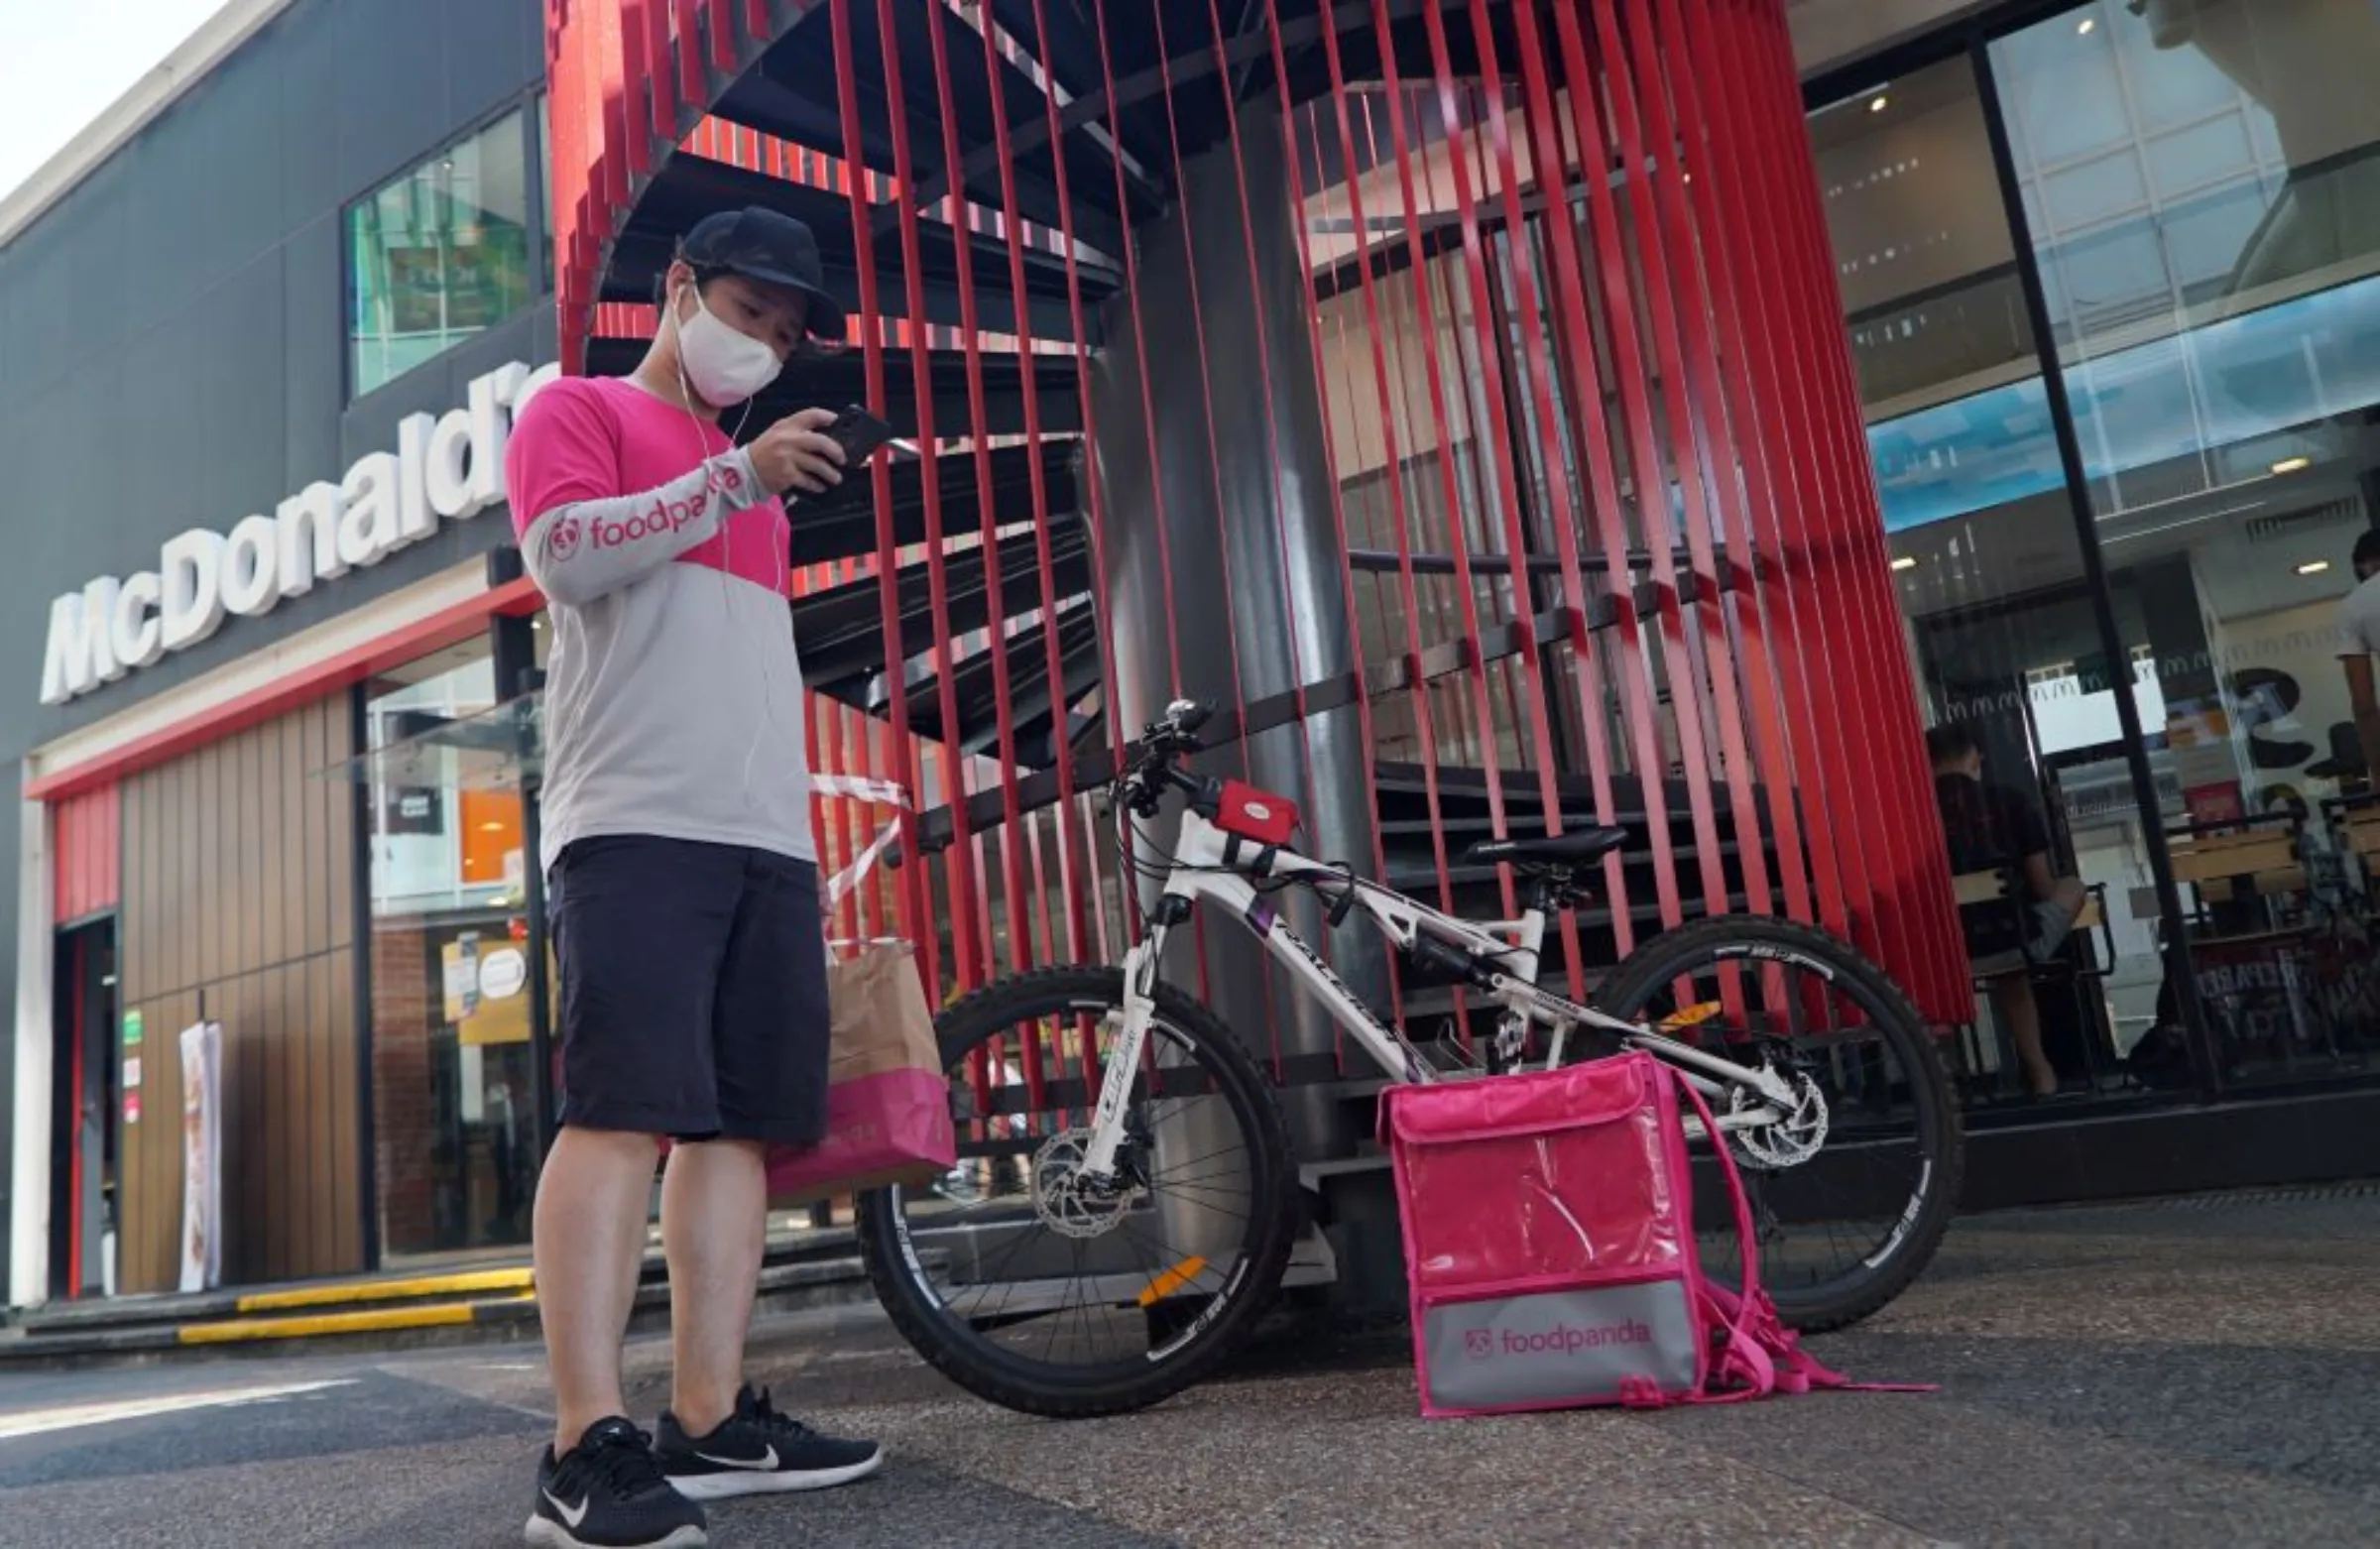 A food delivery driver checks his phone before making a food delivery, amid the coronavirus disease (COVID-19) outbreak, in Singapore March 9, 2021. REUTERS/Joseph Campbell